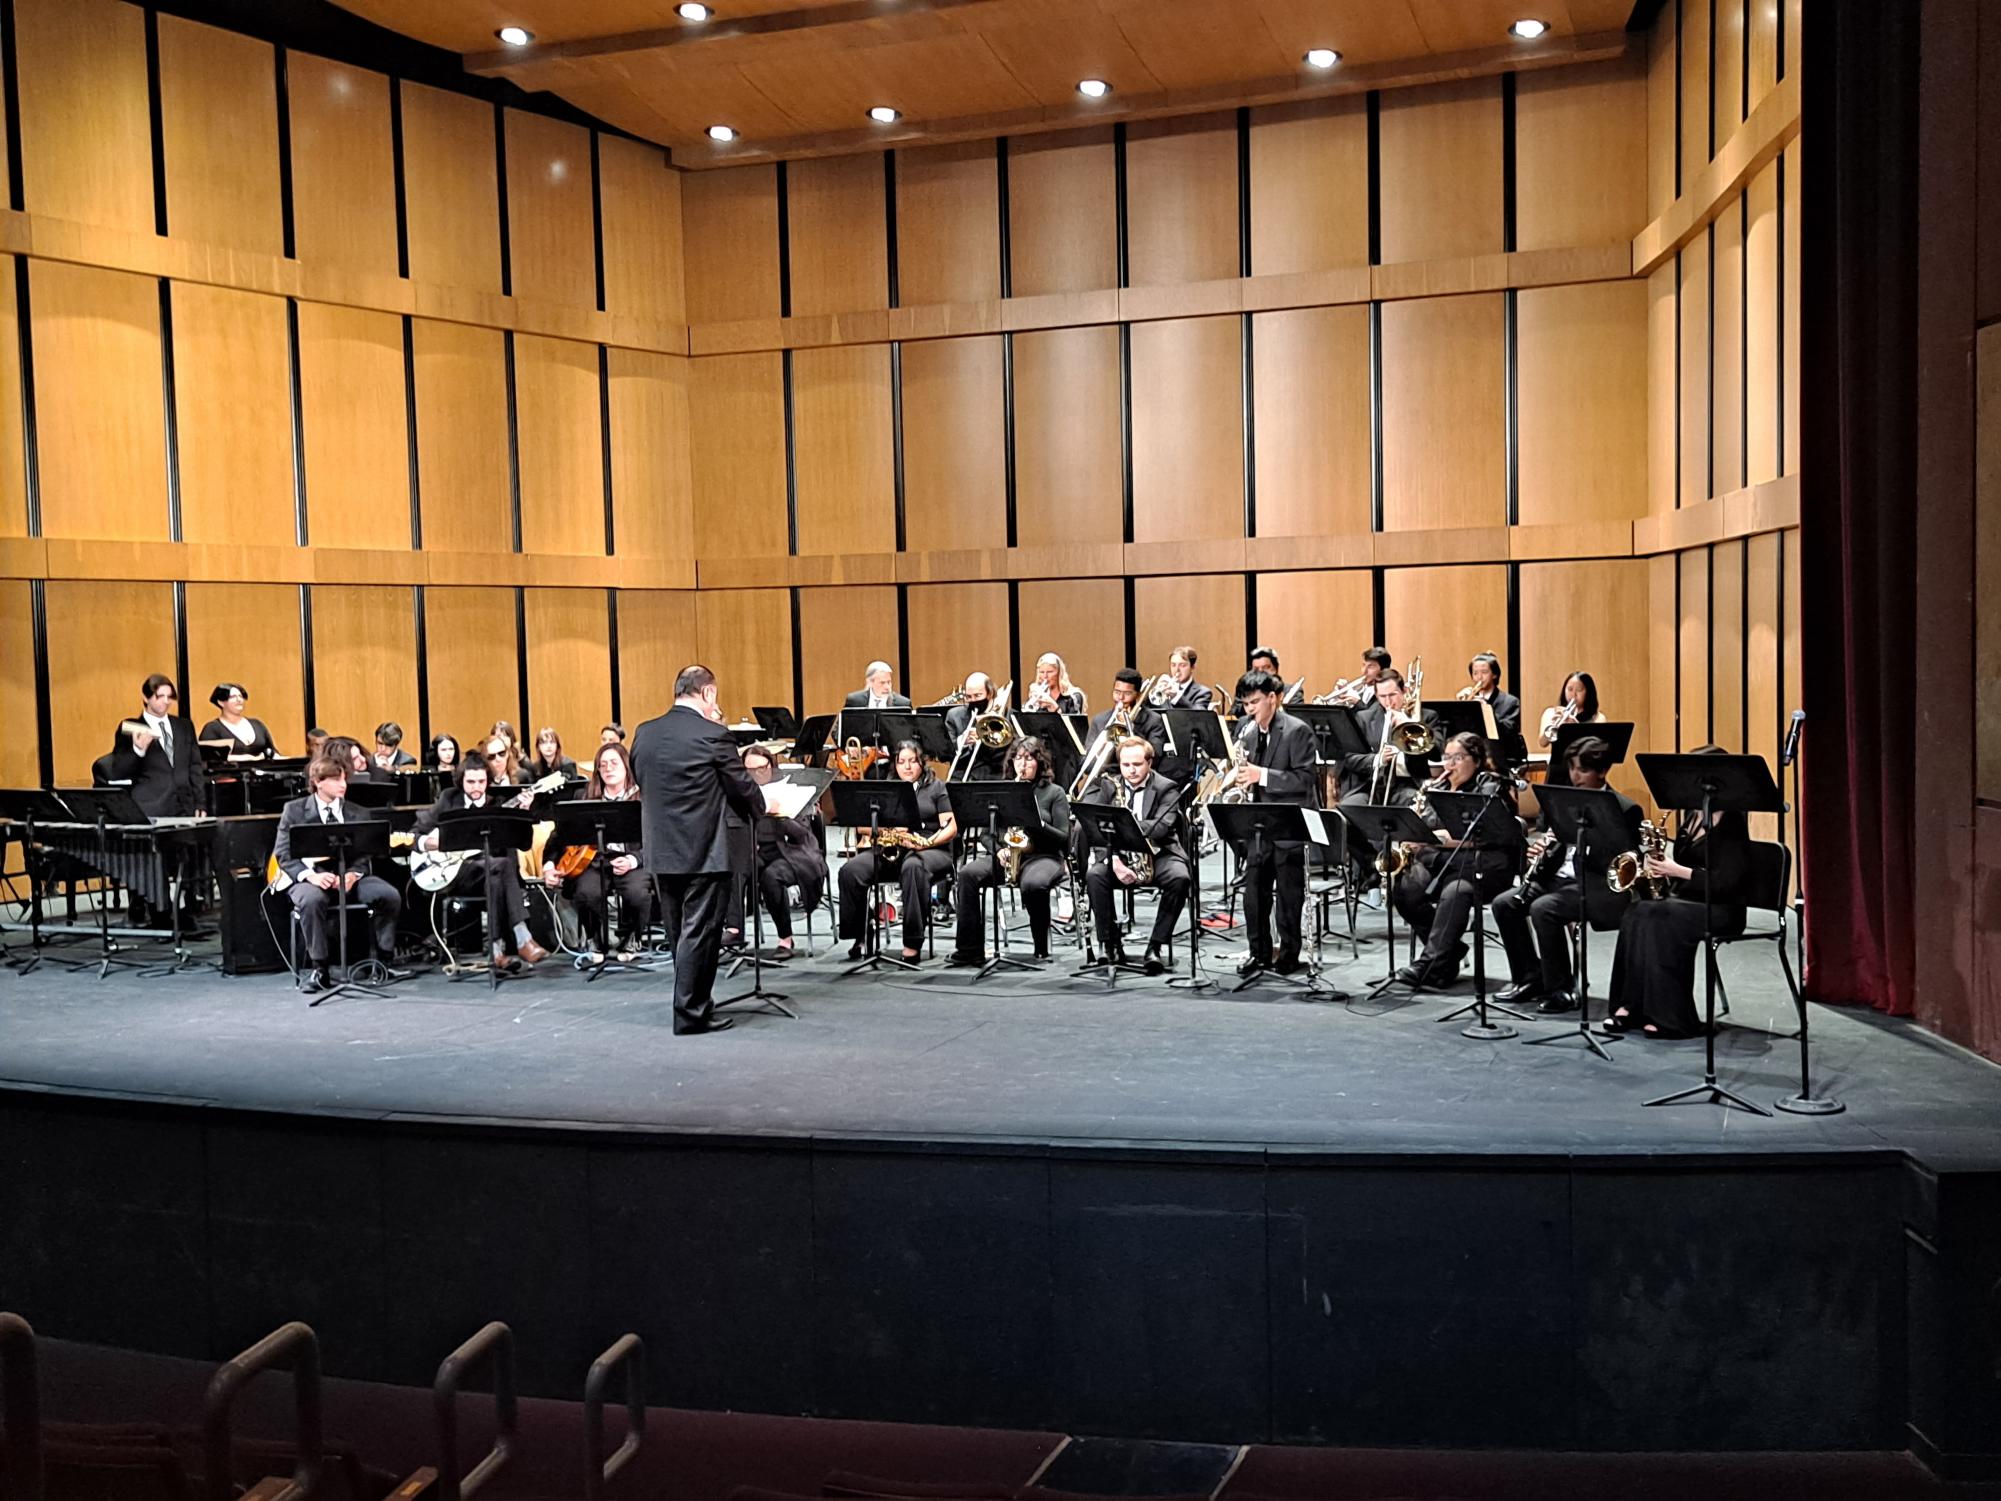 Jazz Ensemble performing at Moorpark College&squot;s annual "A Dynamic Evening of Music" at the Performing Arts Center on Oct 28, 2023.